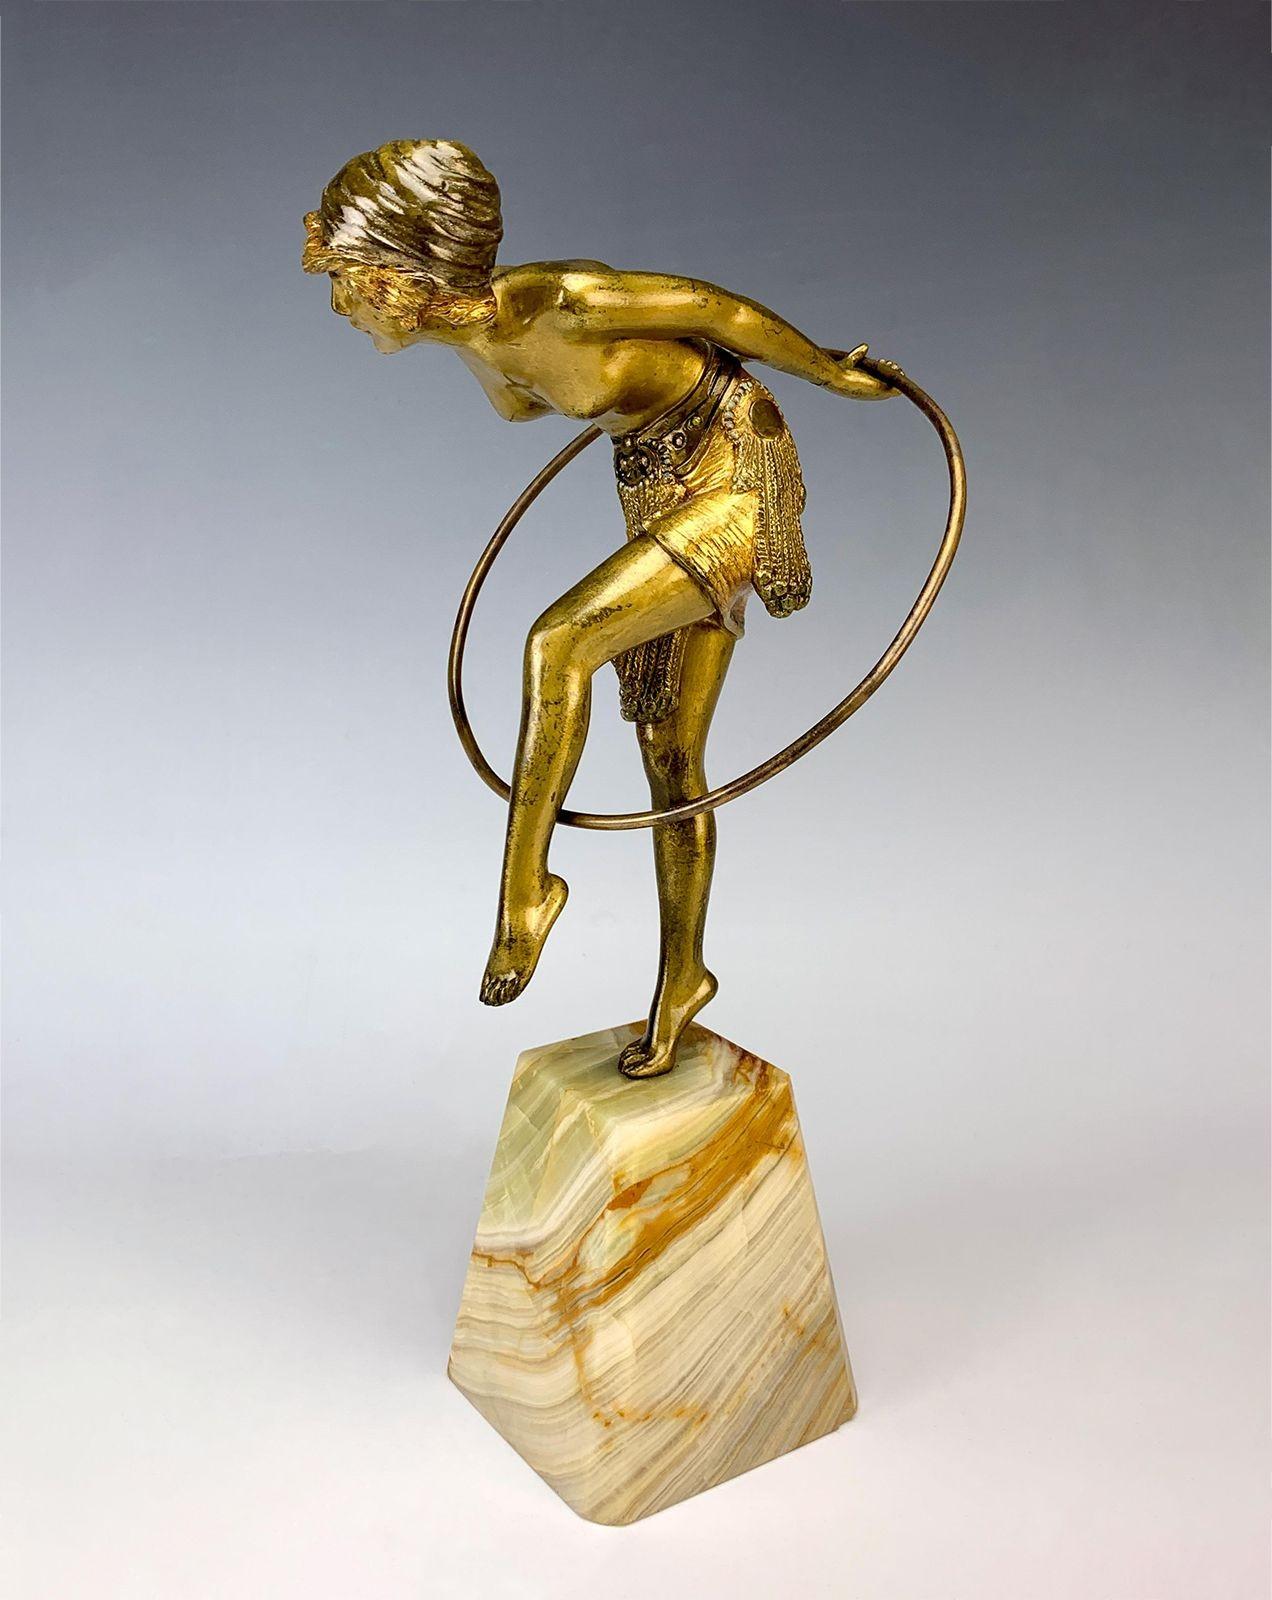 This Demétre Chiparus gilt bronze sculpture is a charming representation of movement and grace. It depicts a hoop girl dancer elegantly twirling her hoop around her body. The sculpture is standing gracefully on a tapering veined onyx base which